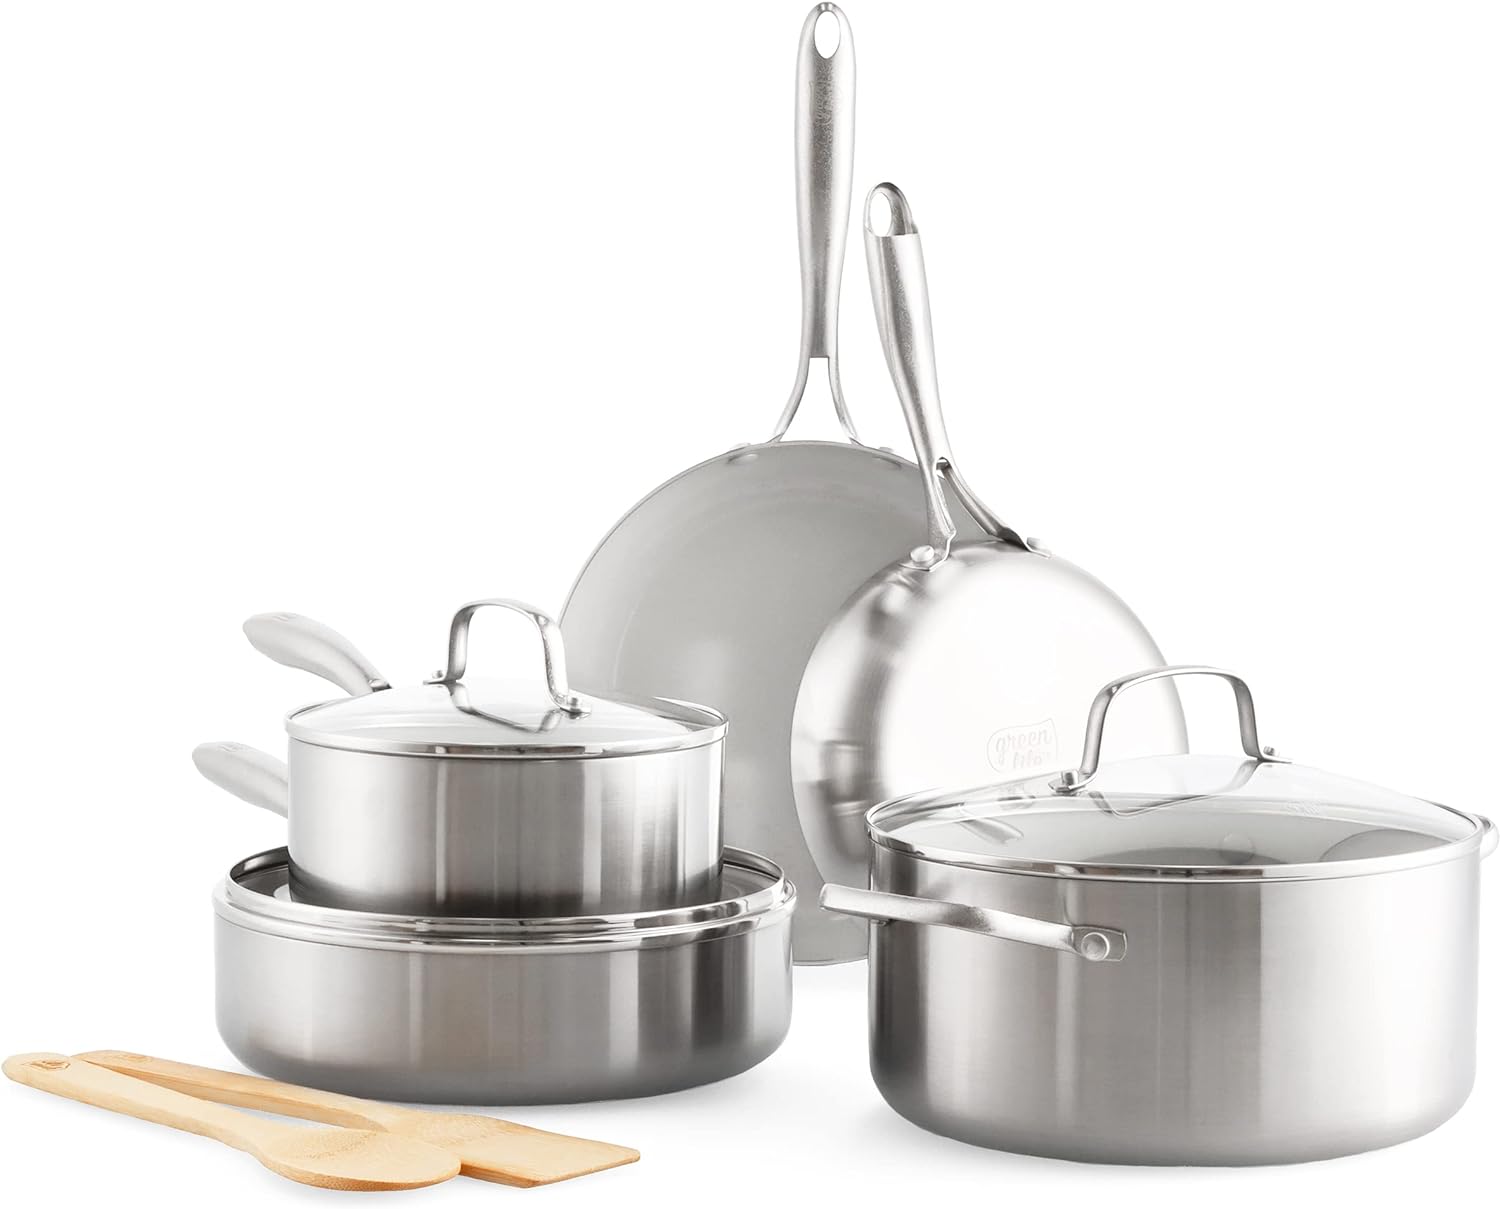 GreenLife Tri-Ply Stainless Steel Cookware Set Review